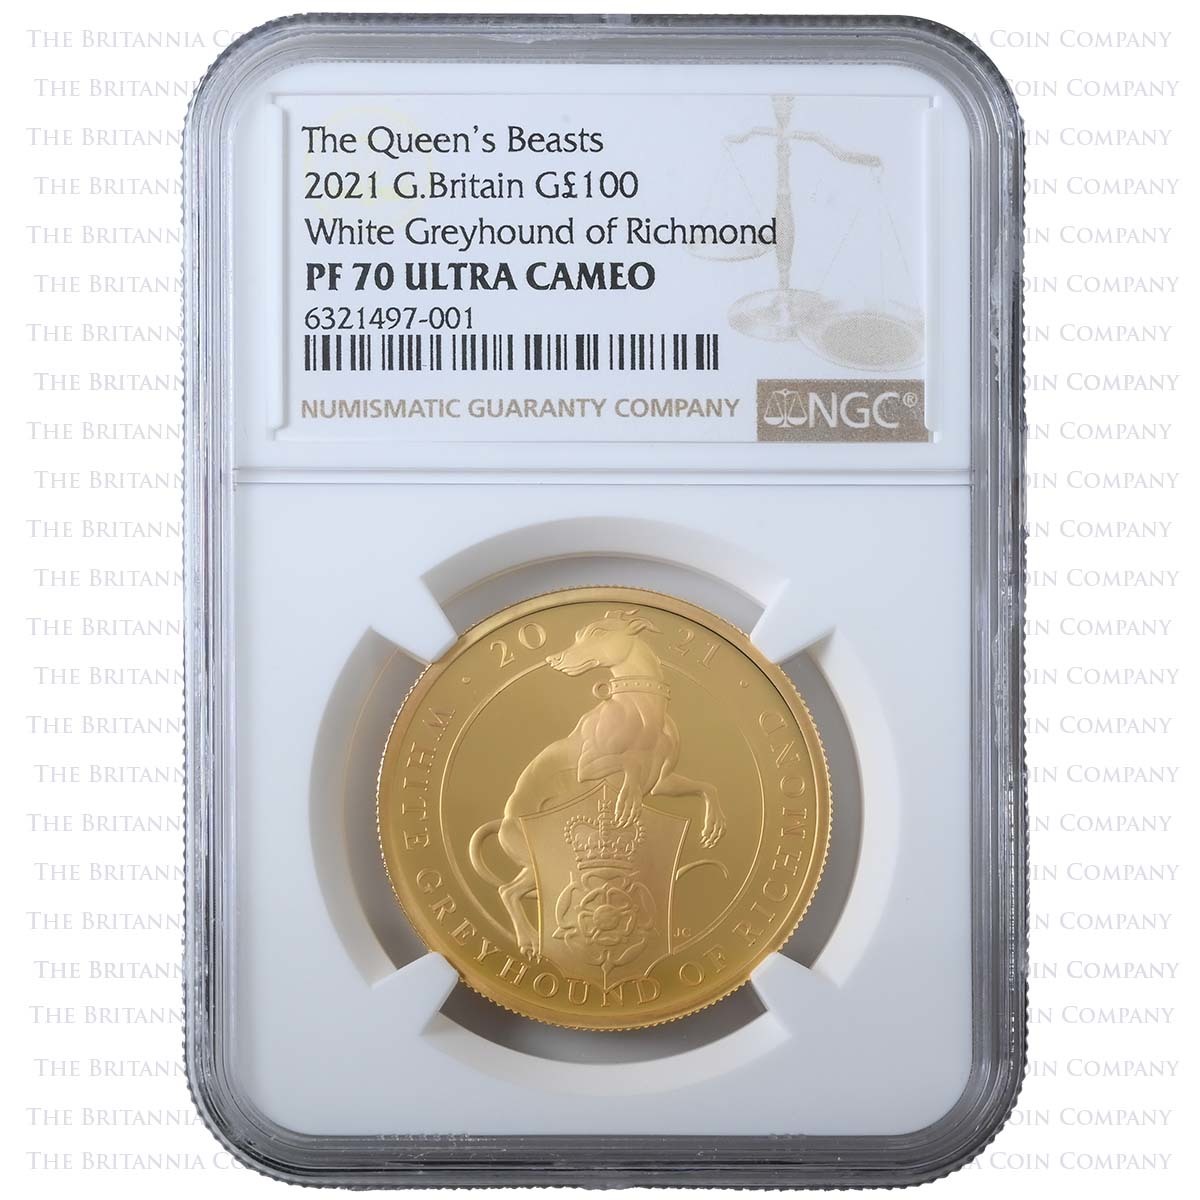 2021 Queen’s Beasts White Greyhound of Richmond 1 Ounce Gold Proof PF 70 Graded